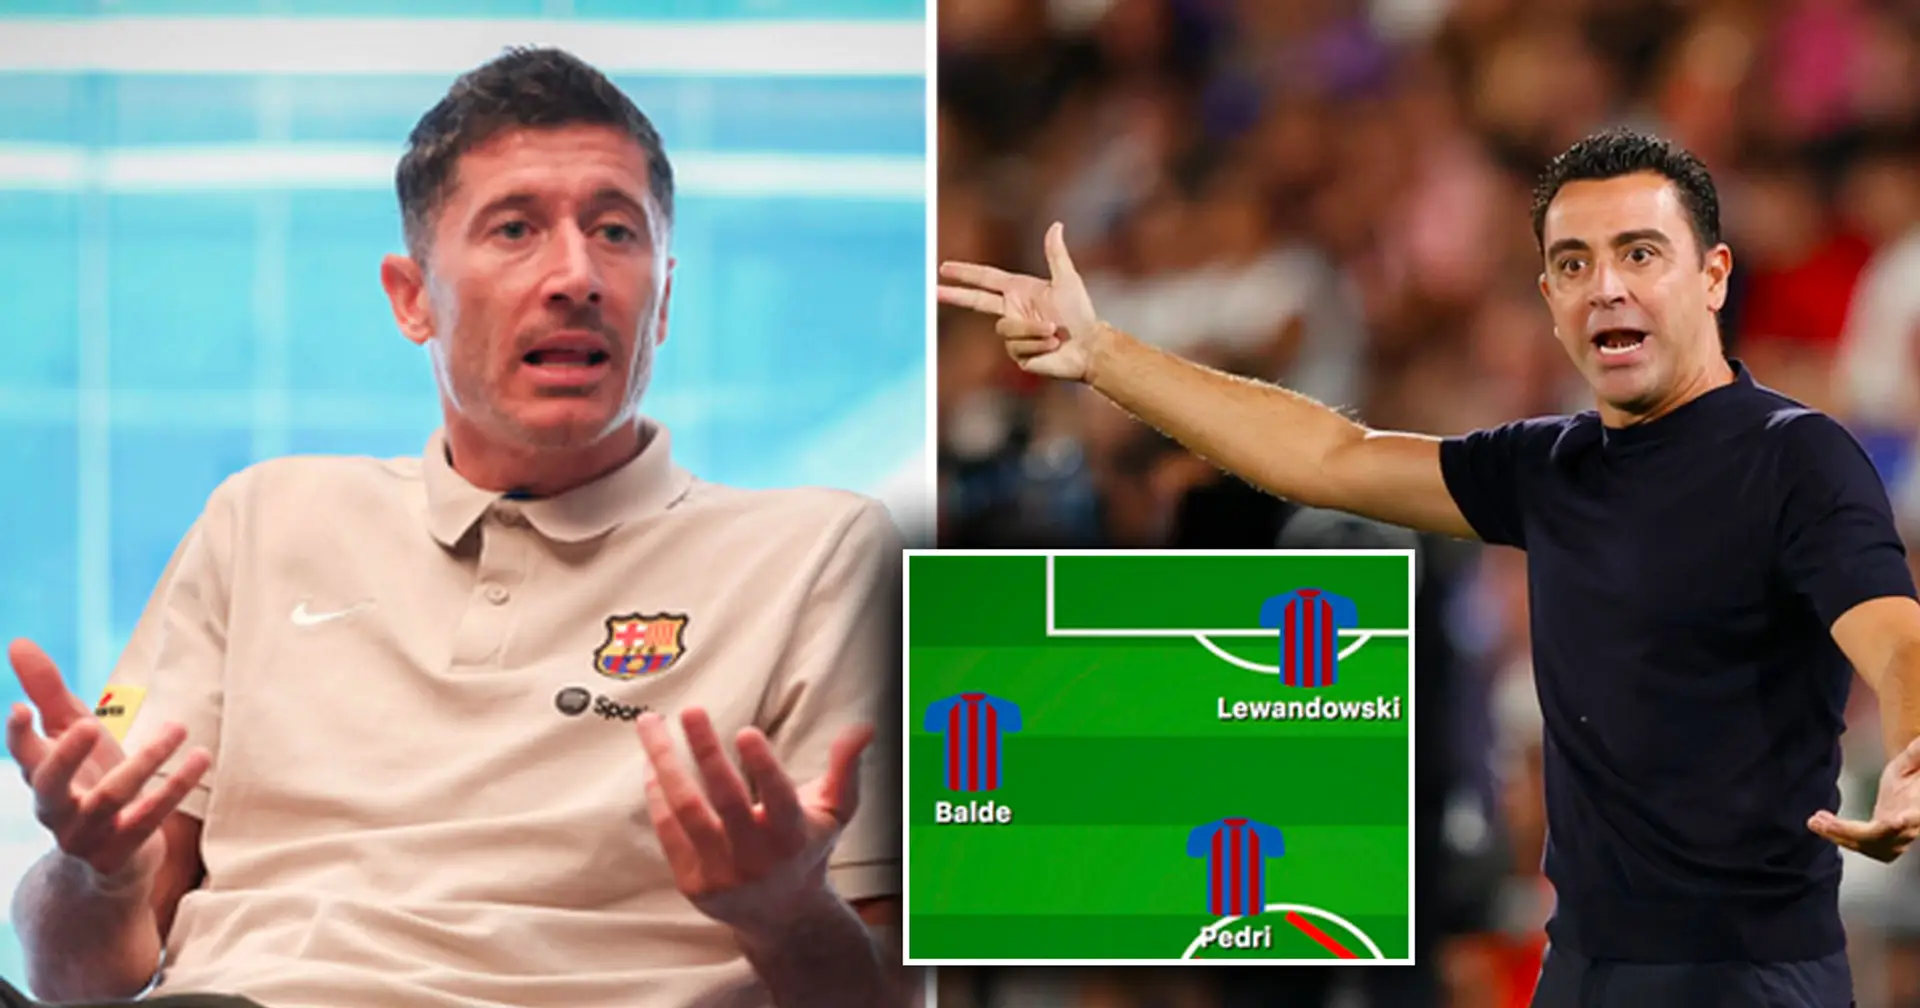 'Sometimes I don't get any support': Lewandowski apparently aims dig at Xavi's four-midfielder formation